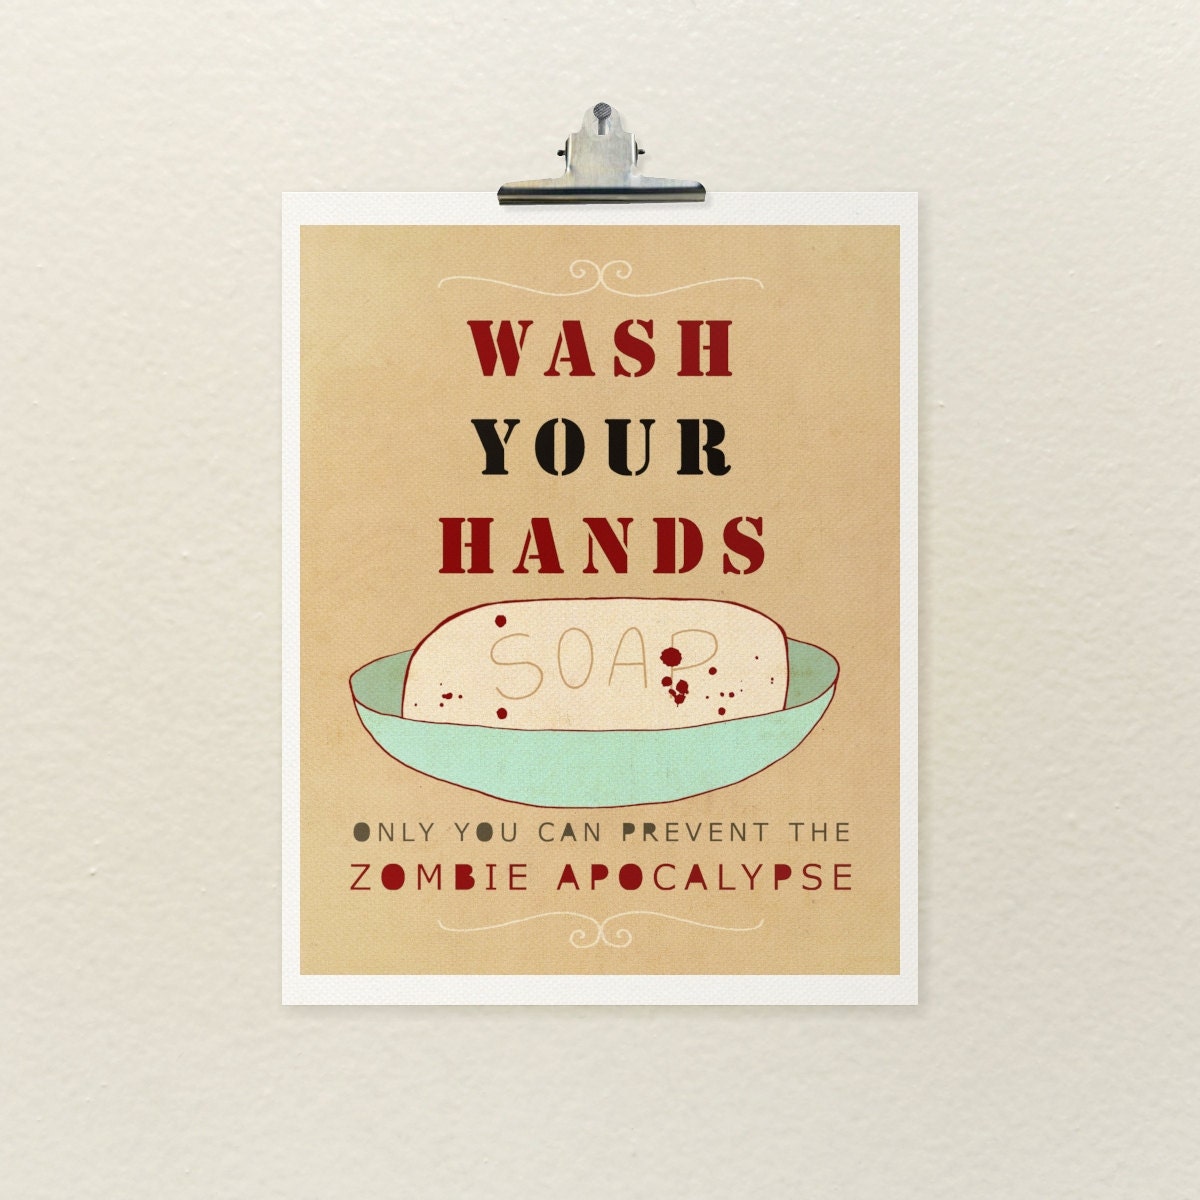 Wash Your Hands or Zombies 8x10 / Typographic Print by LisaBarbero